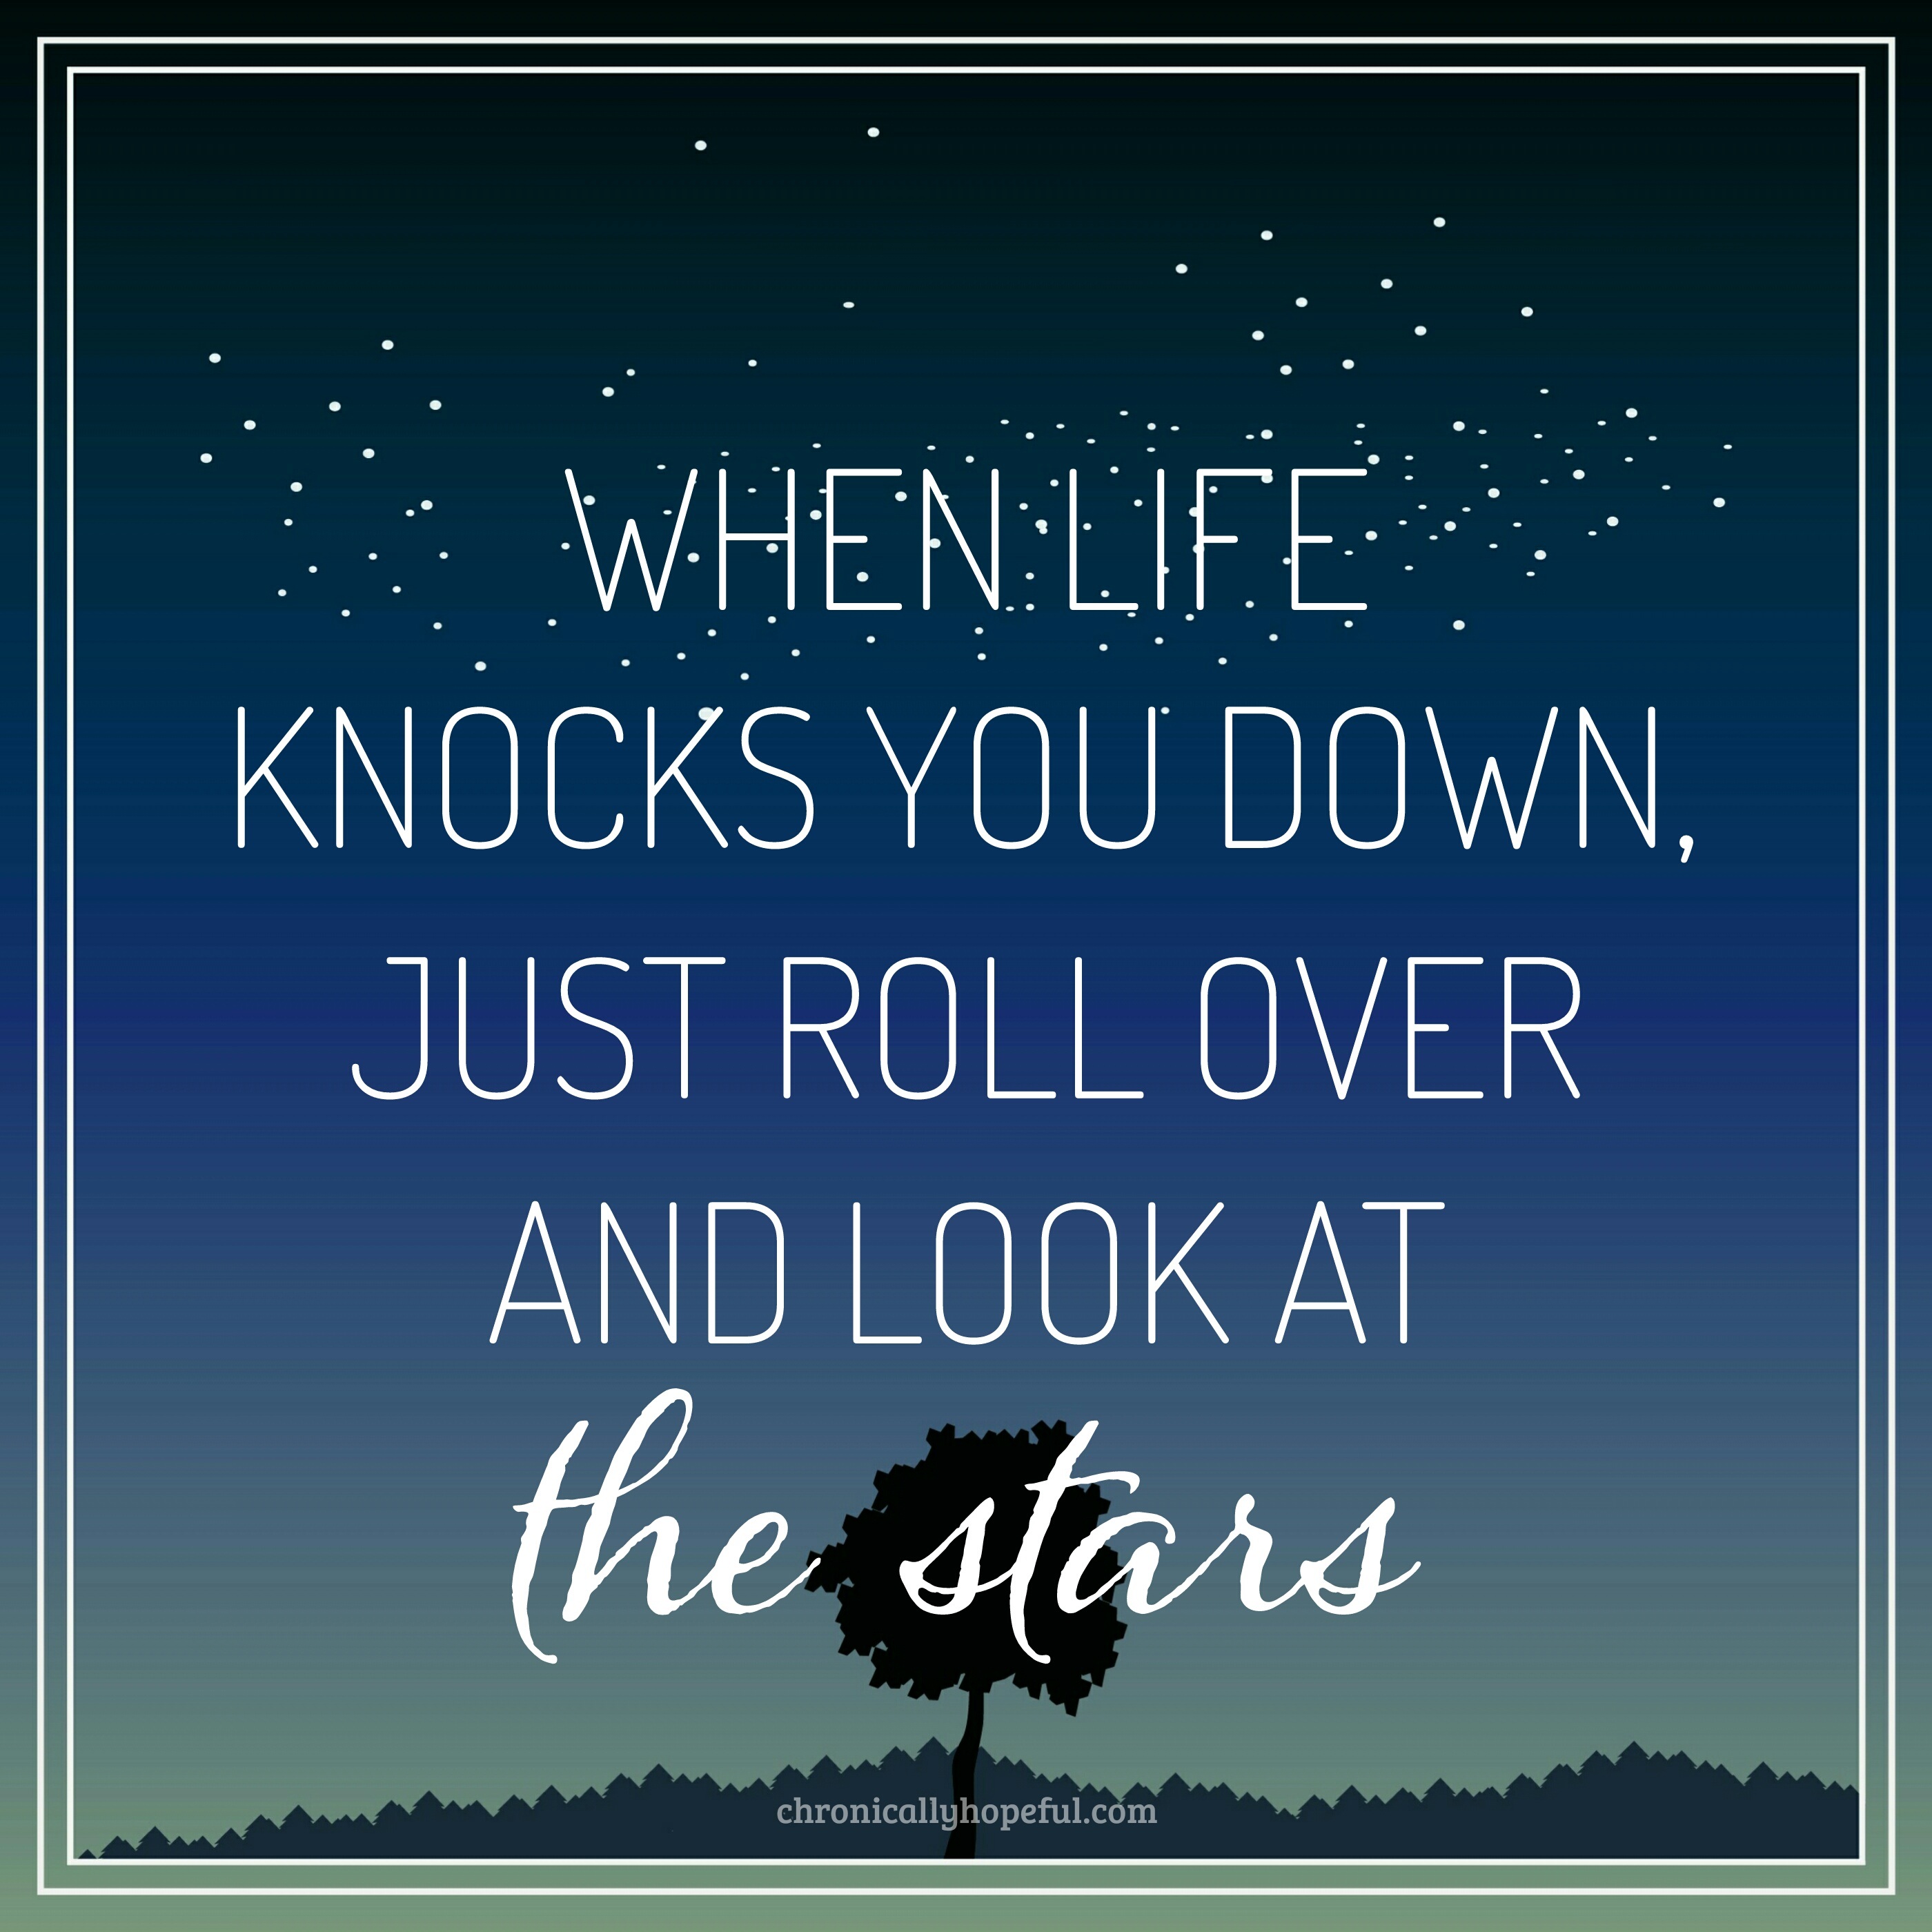 When life knocks you down, look at the stars